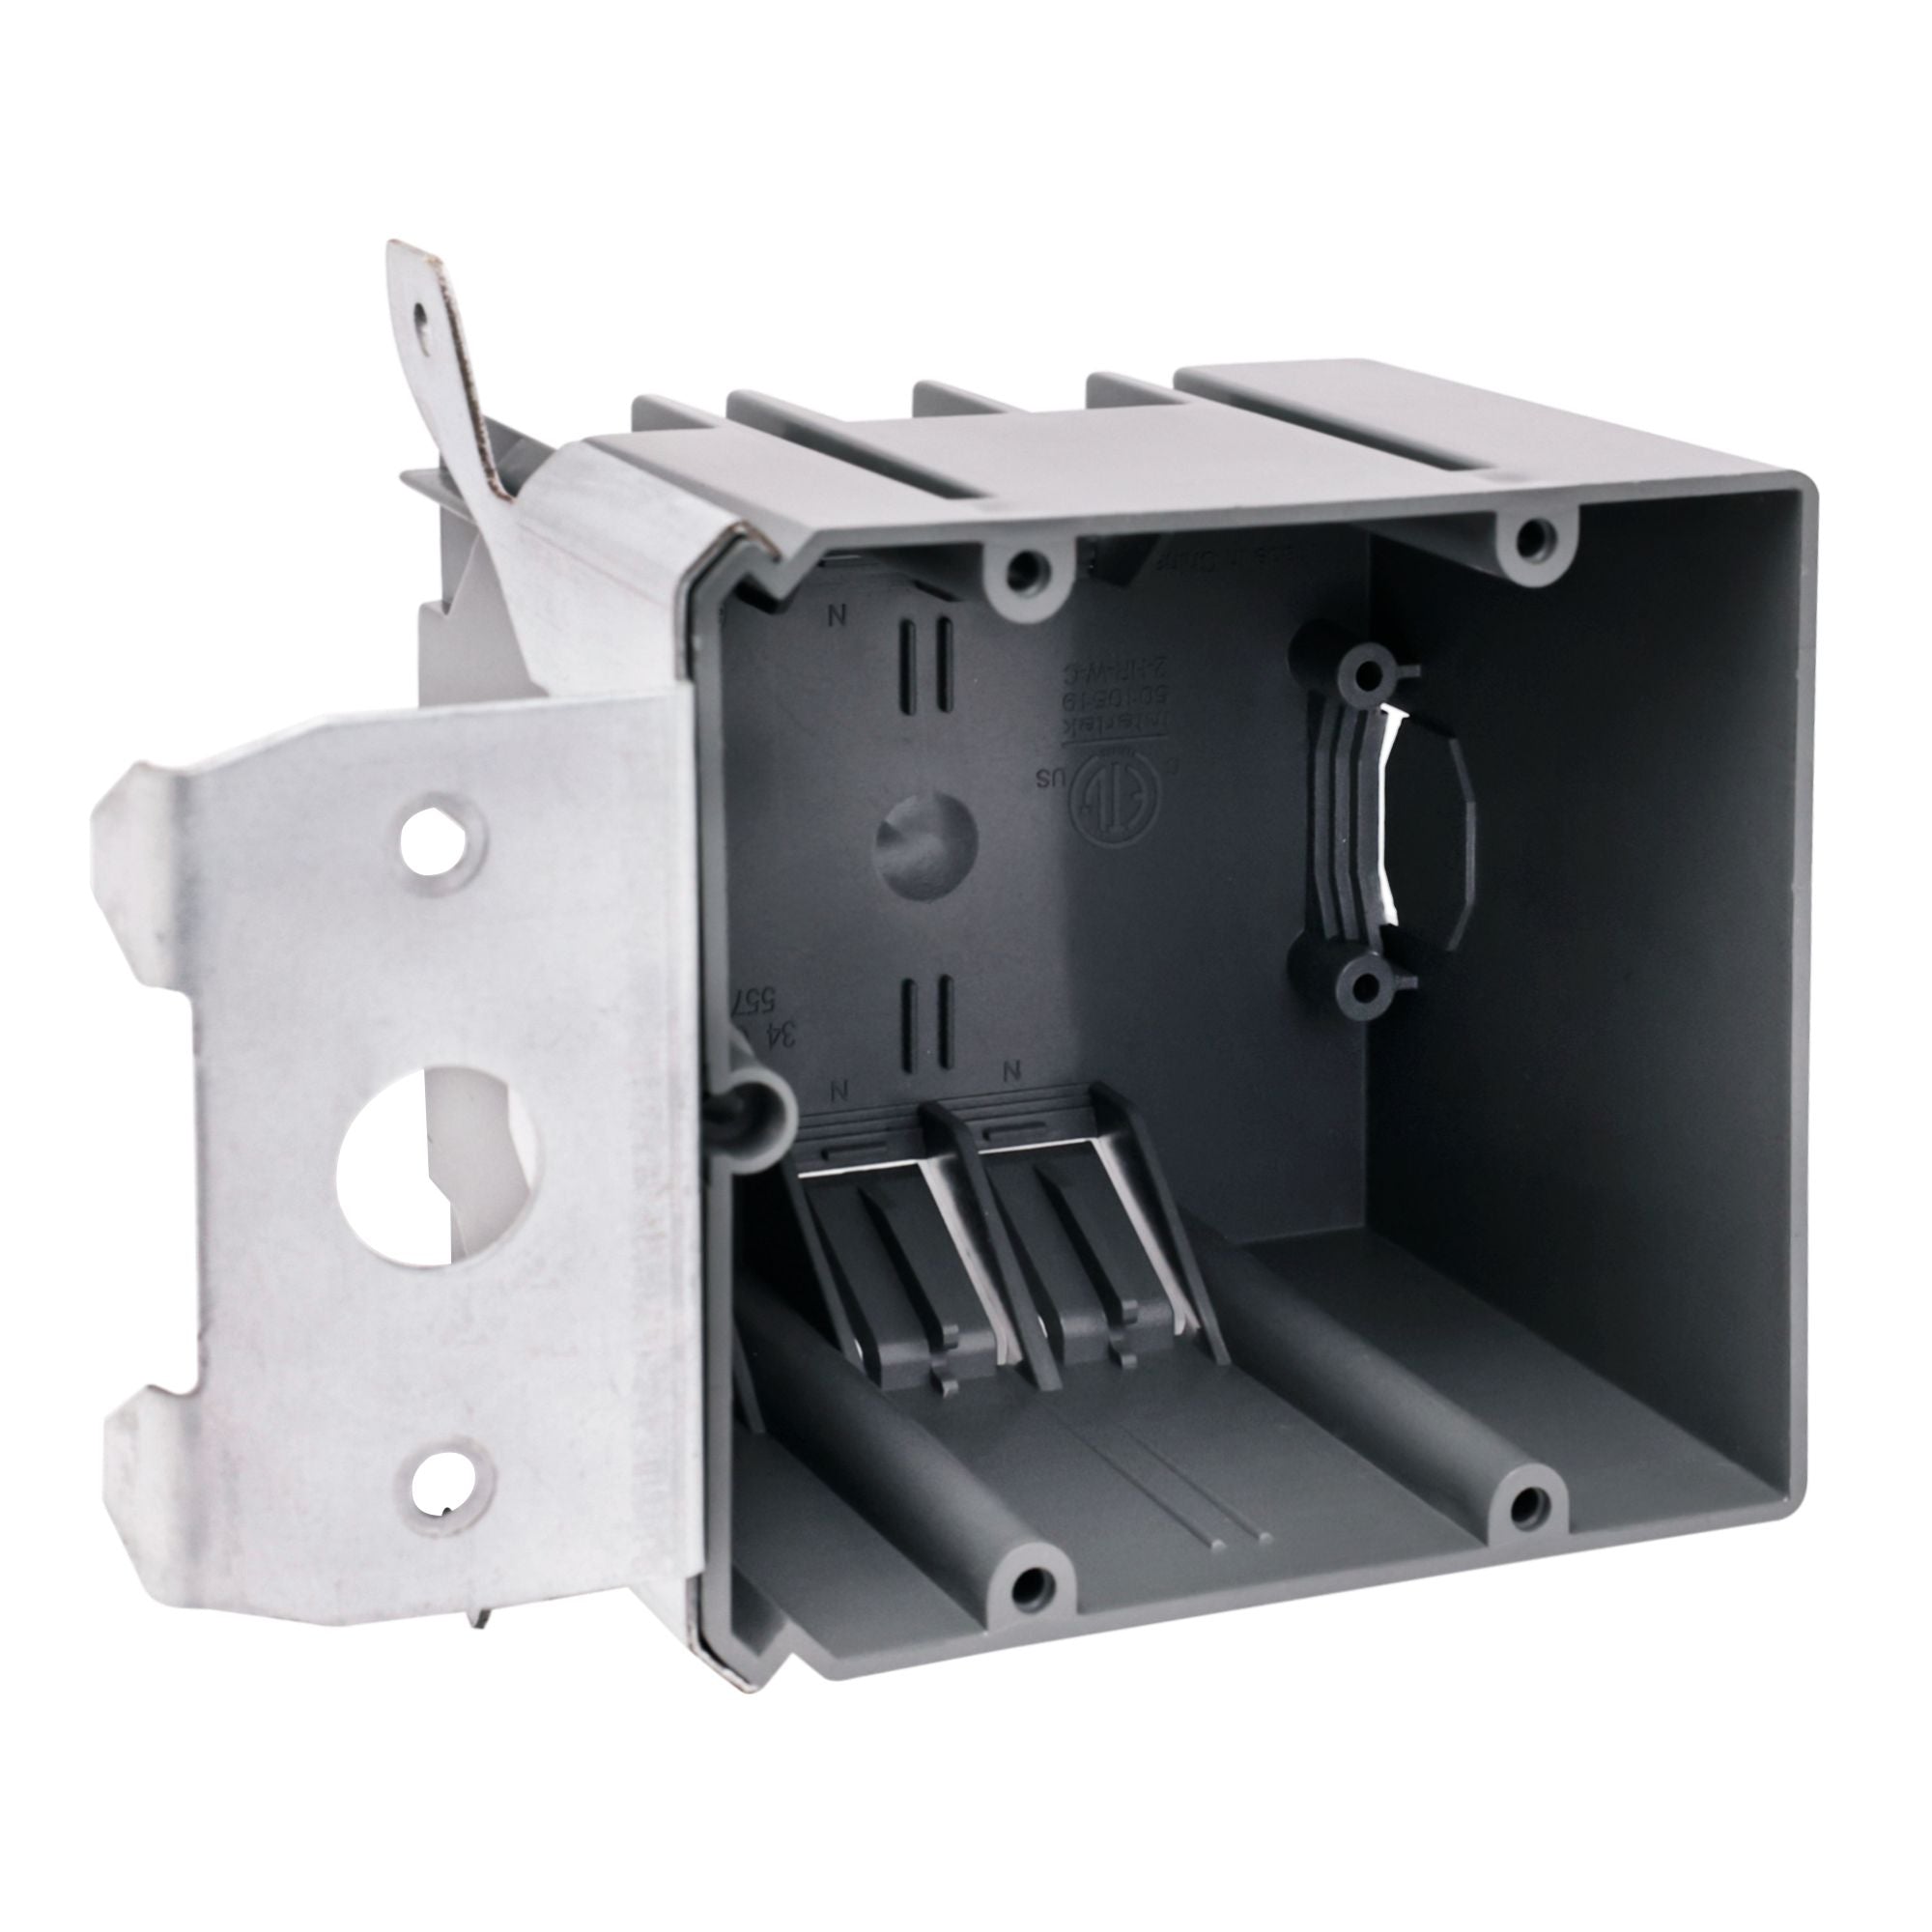 Non-Metallic Two-Gang Adjustable Vertical Outlet Box - New Work, 34 Cubic